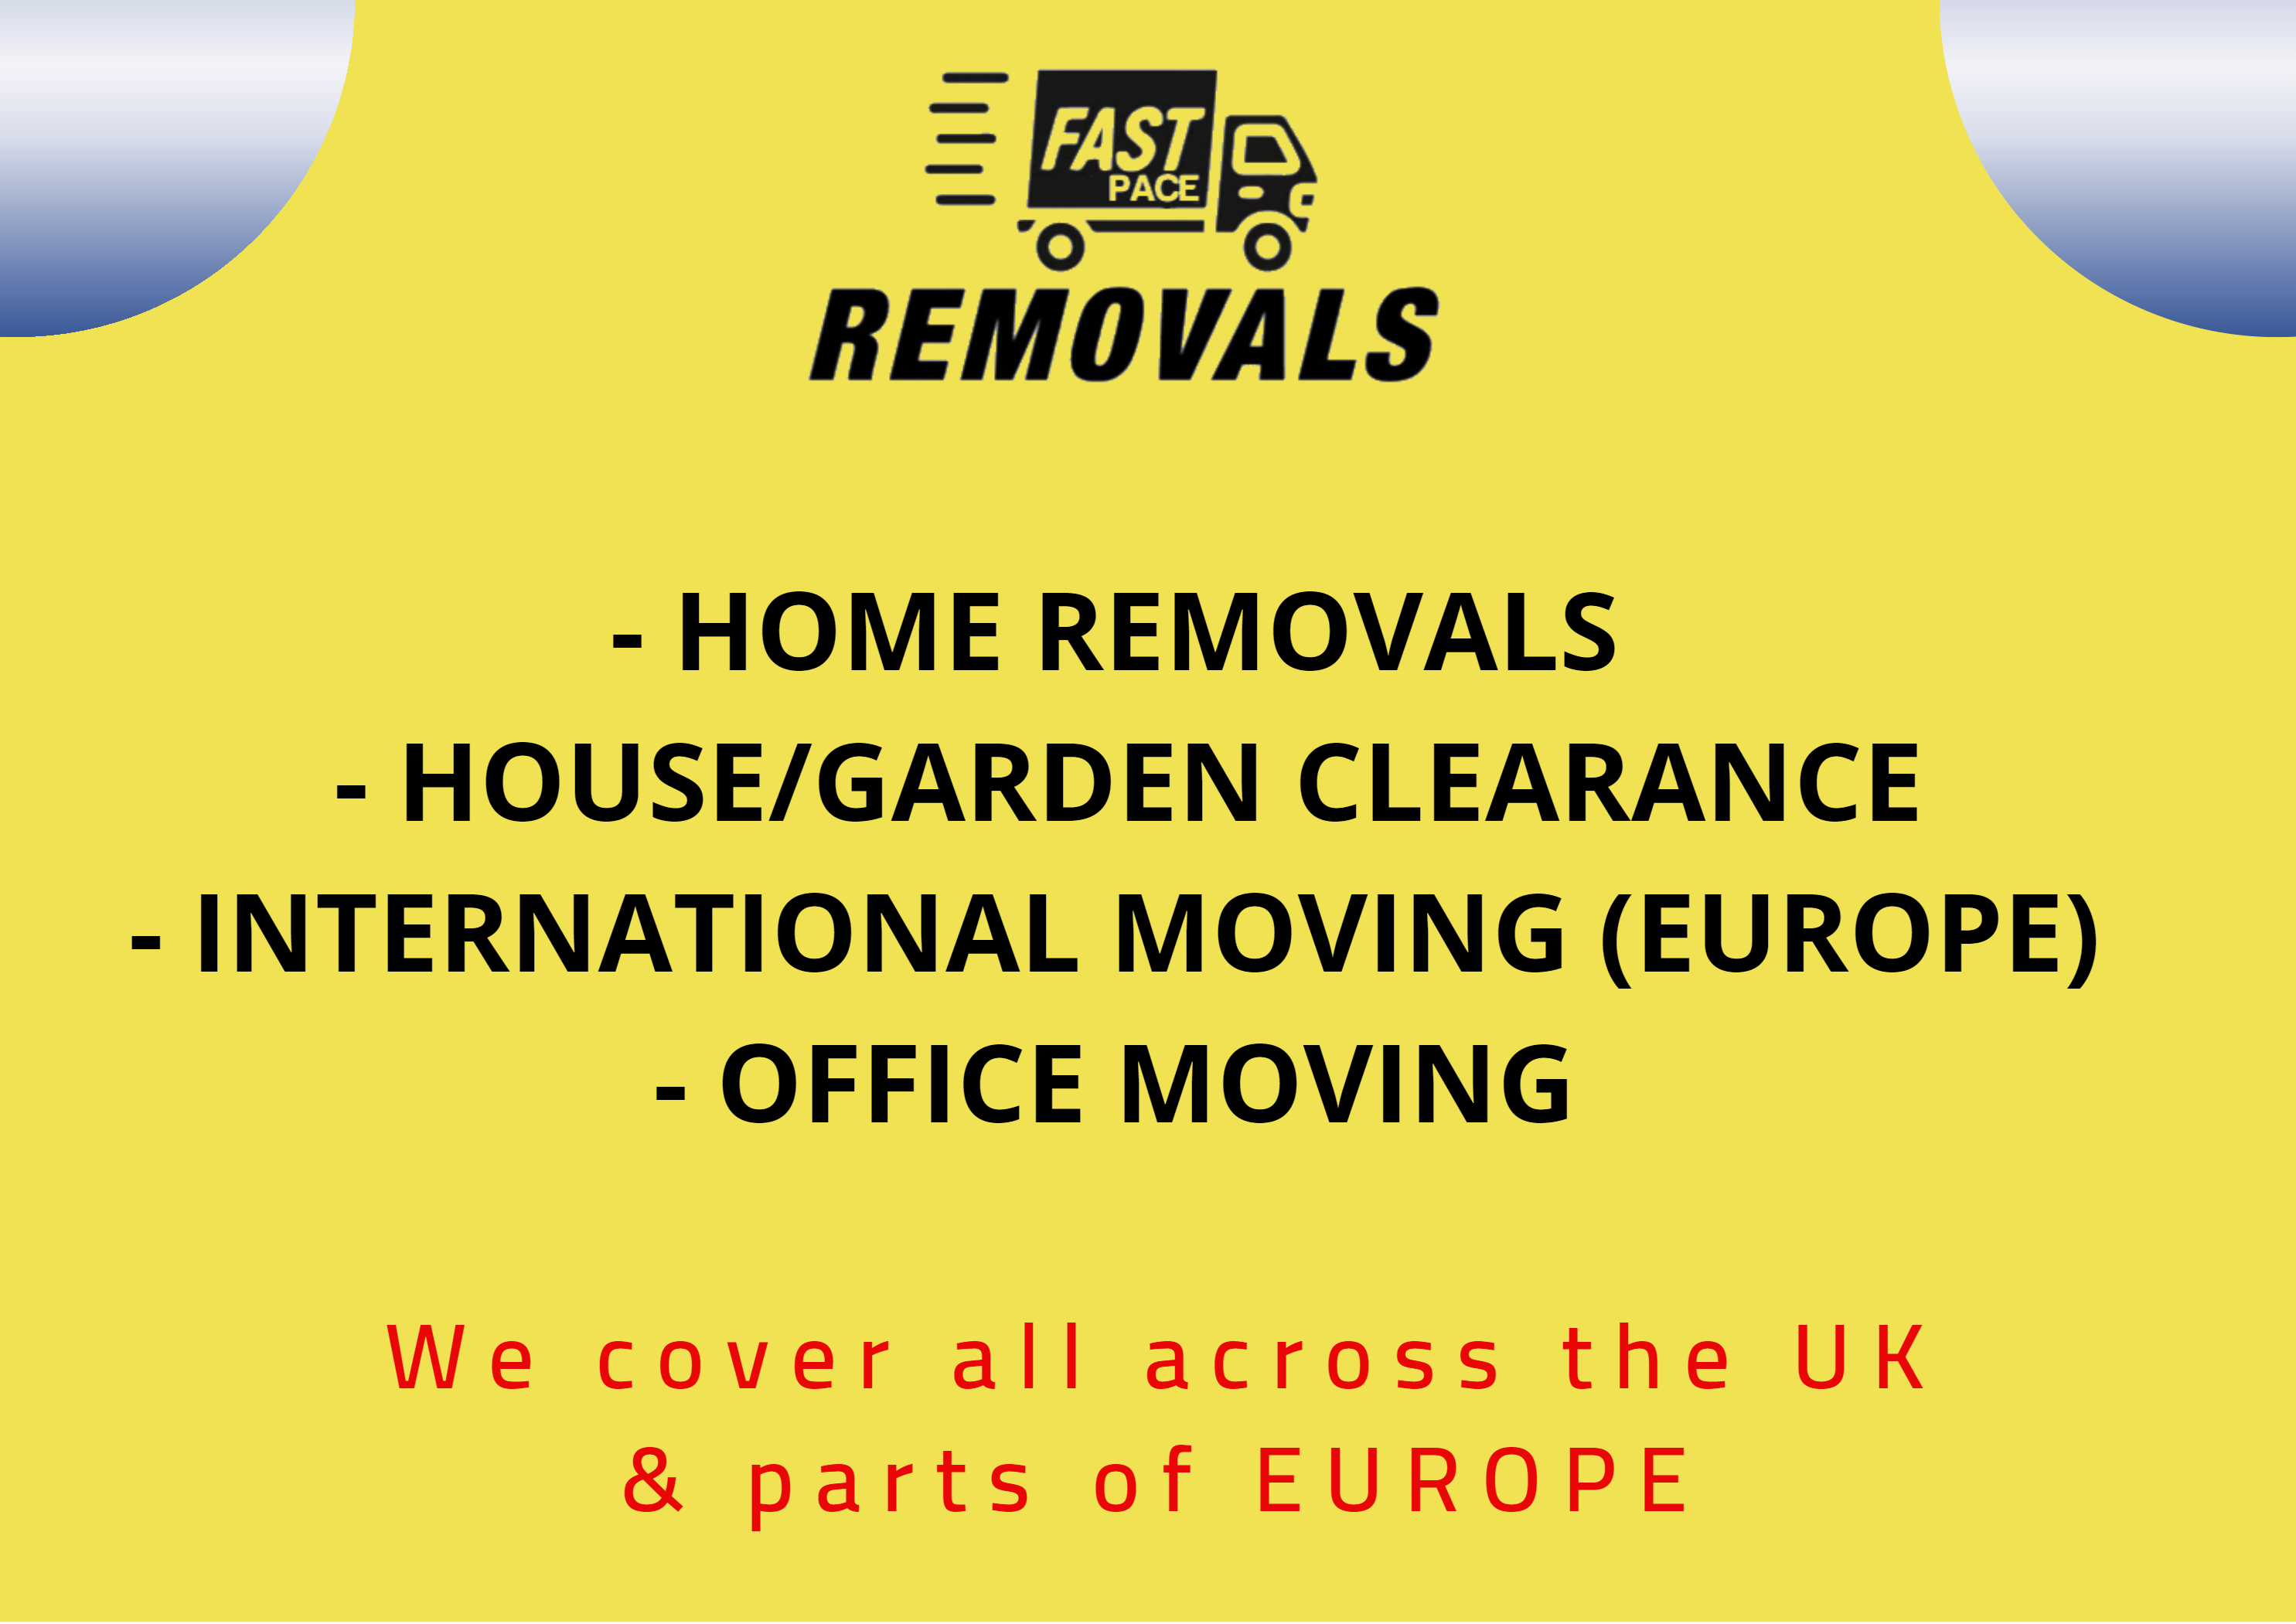 Fast Pace Removals Flyer